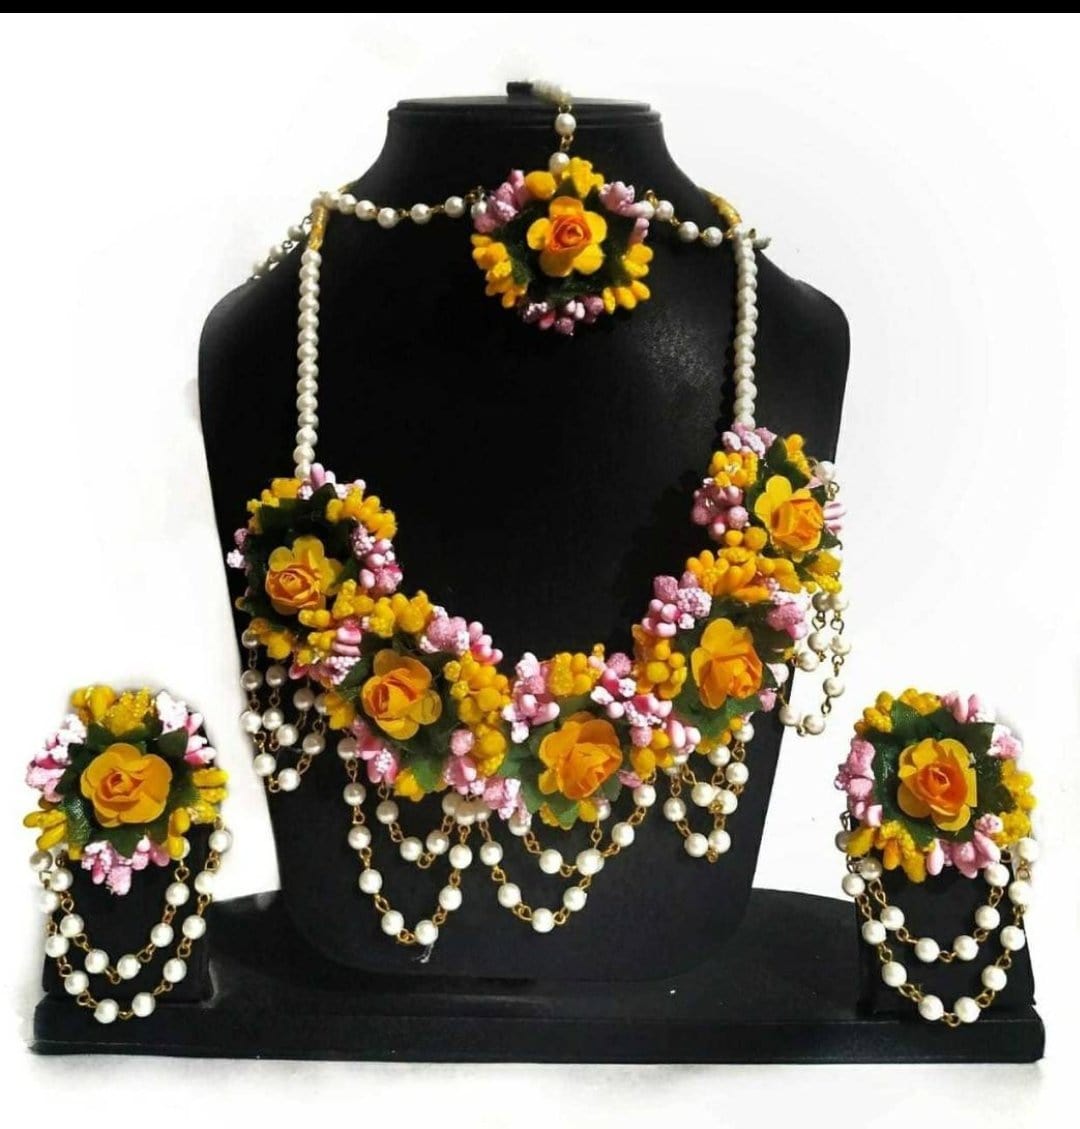 Multicolour floral jewellery for wedding's